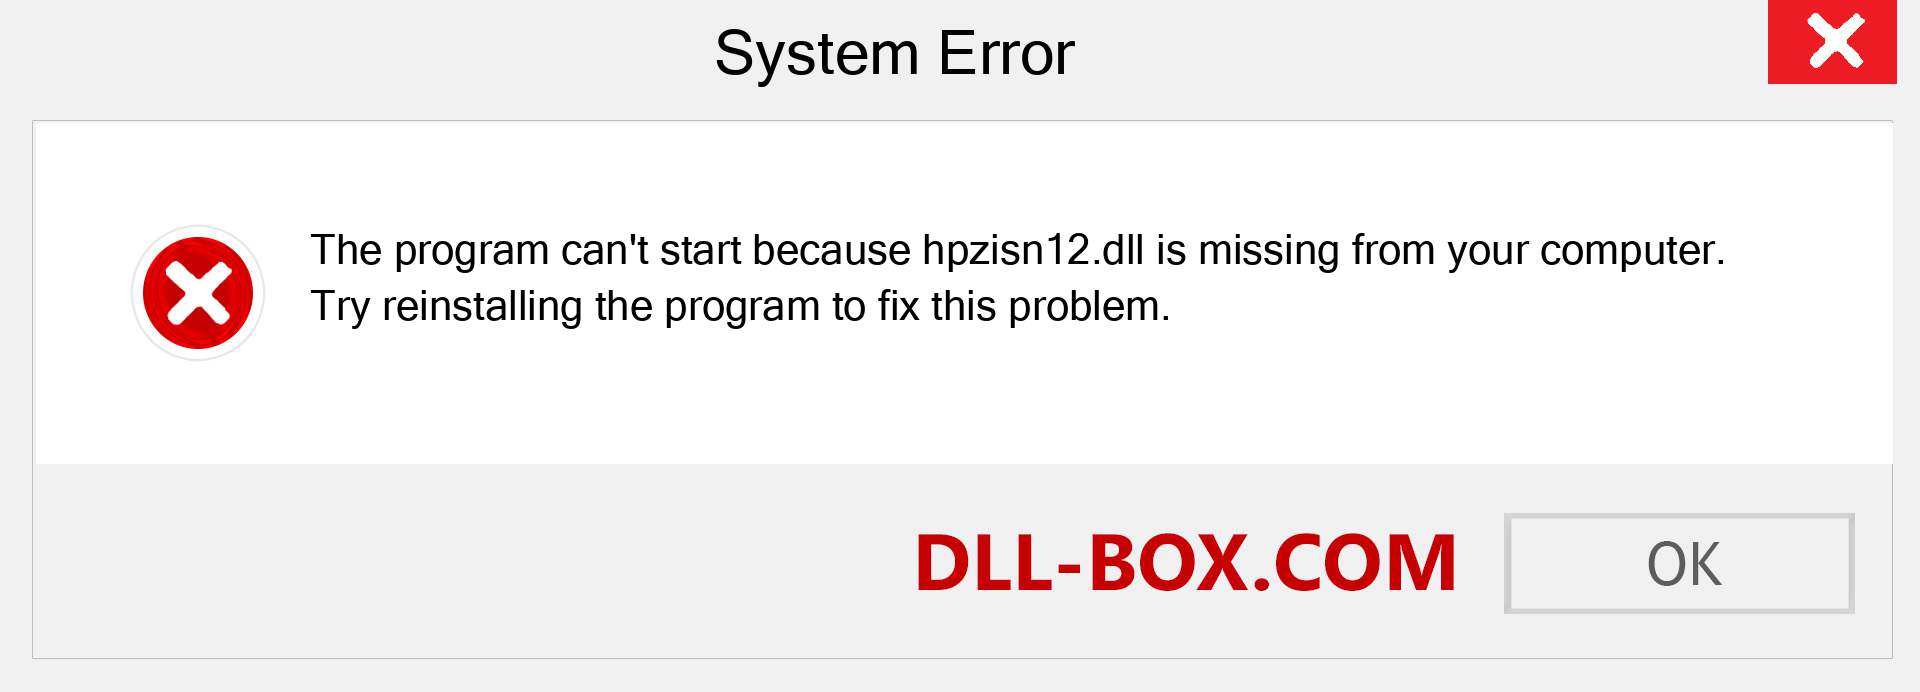  hpzisn12.dll file is missing?. Download for Windows 7, 8, 10 - Fix  hpzisn12 dll Missing Error on Windows, photos, images